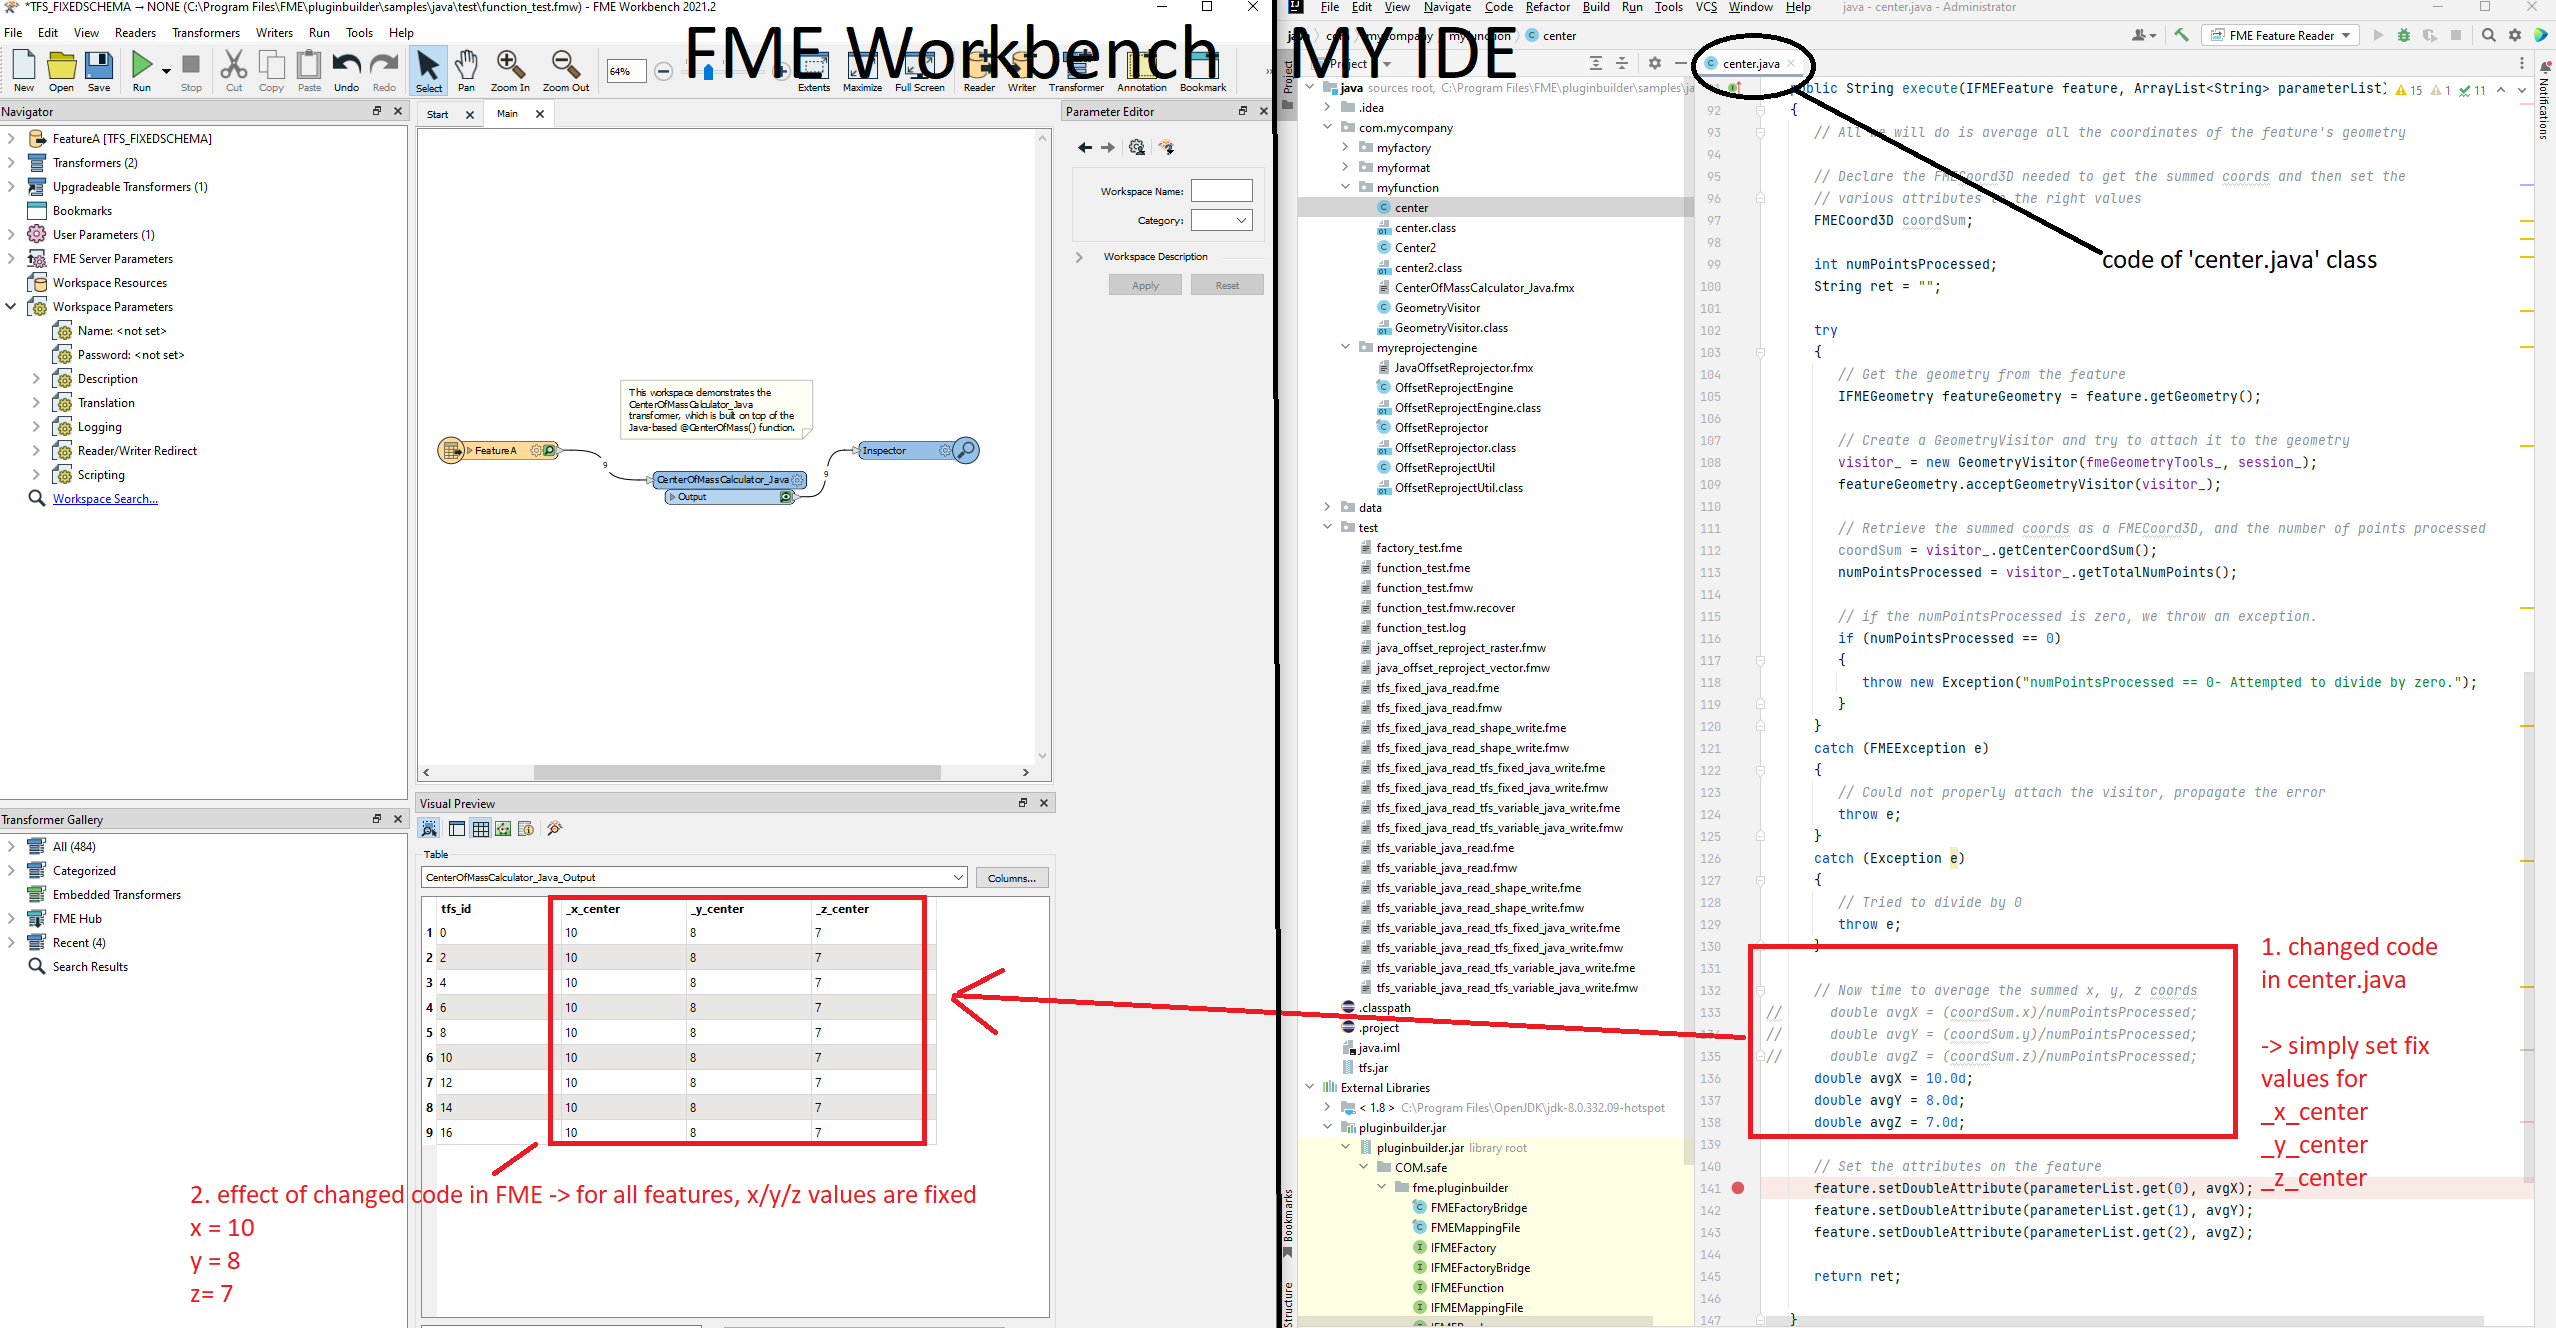 02_Changed Java code and effect on results in FME